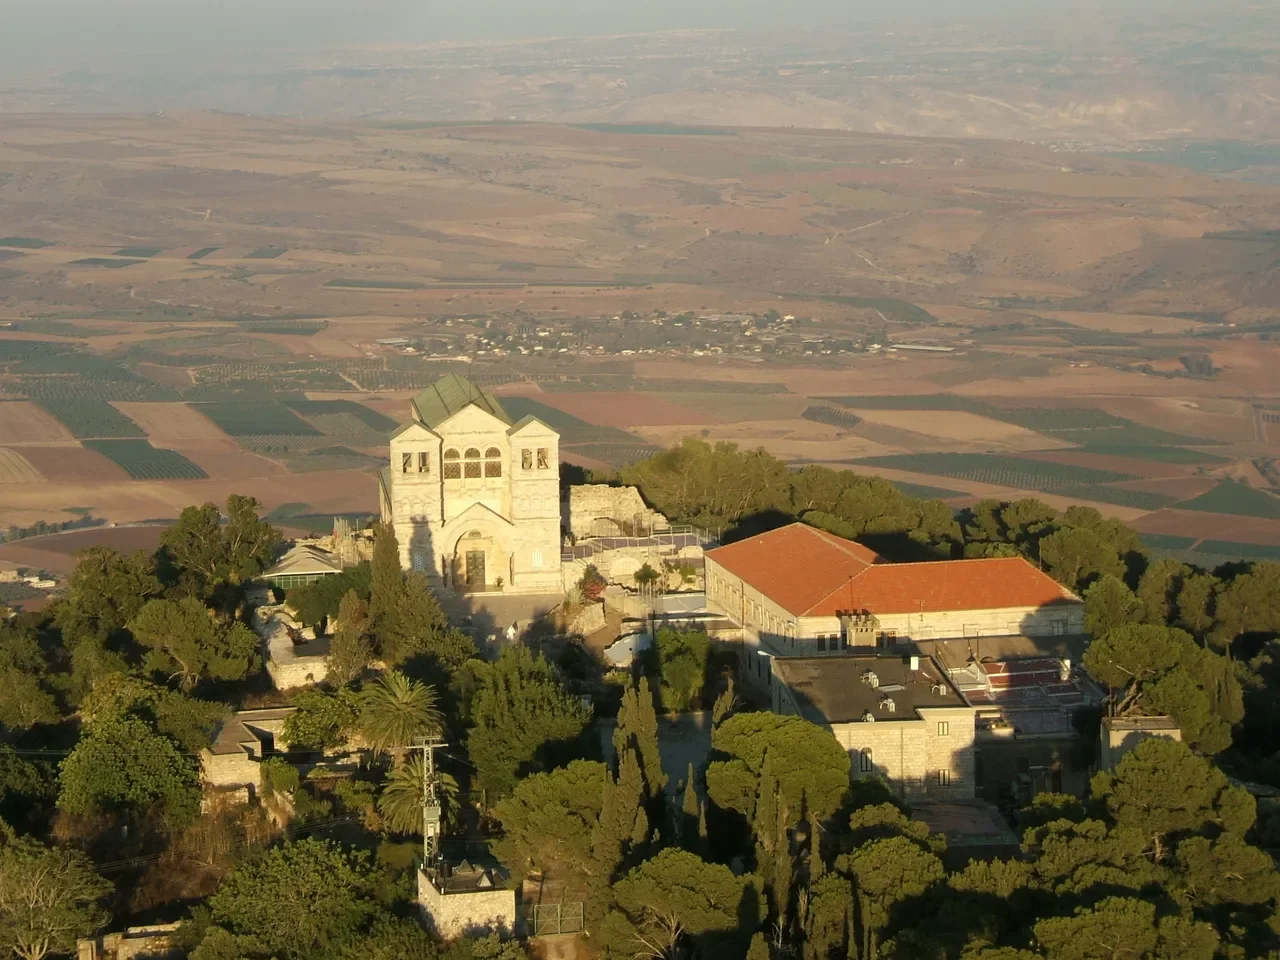 Photo of traditional site of Transfiguration of Jesus Christ (Mount Tabor).